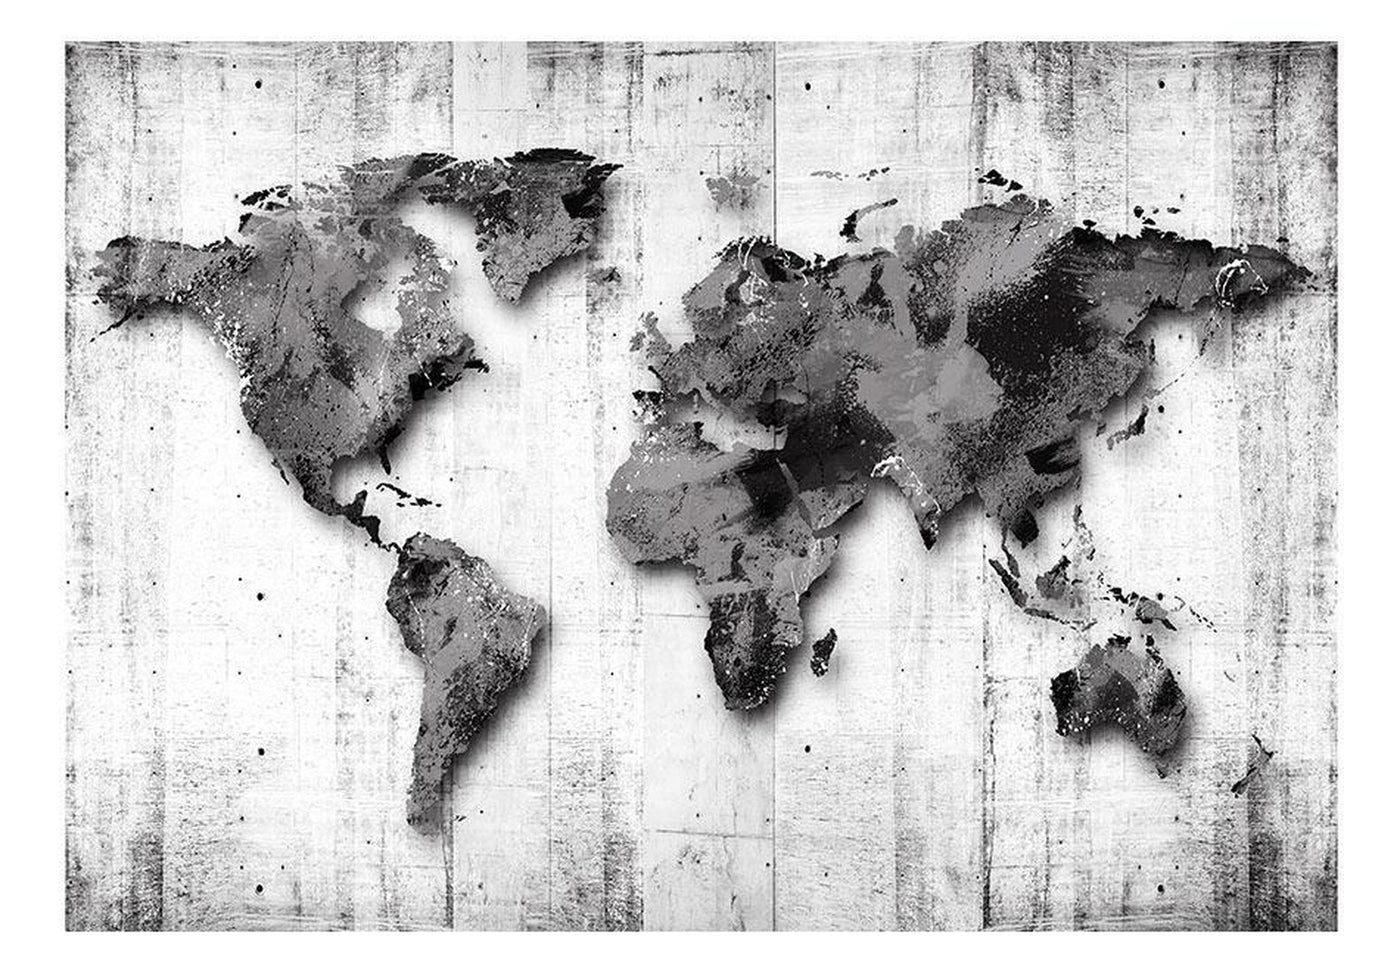 Peel and stick wall mural - World in Shades of Gray-TipTopHomeDecor